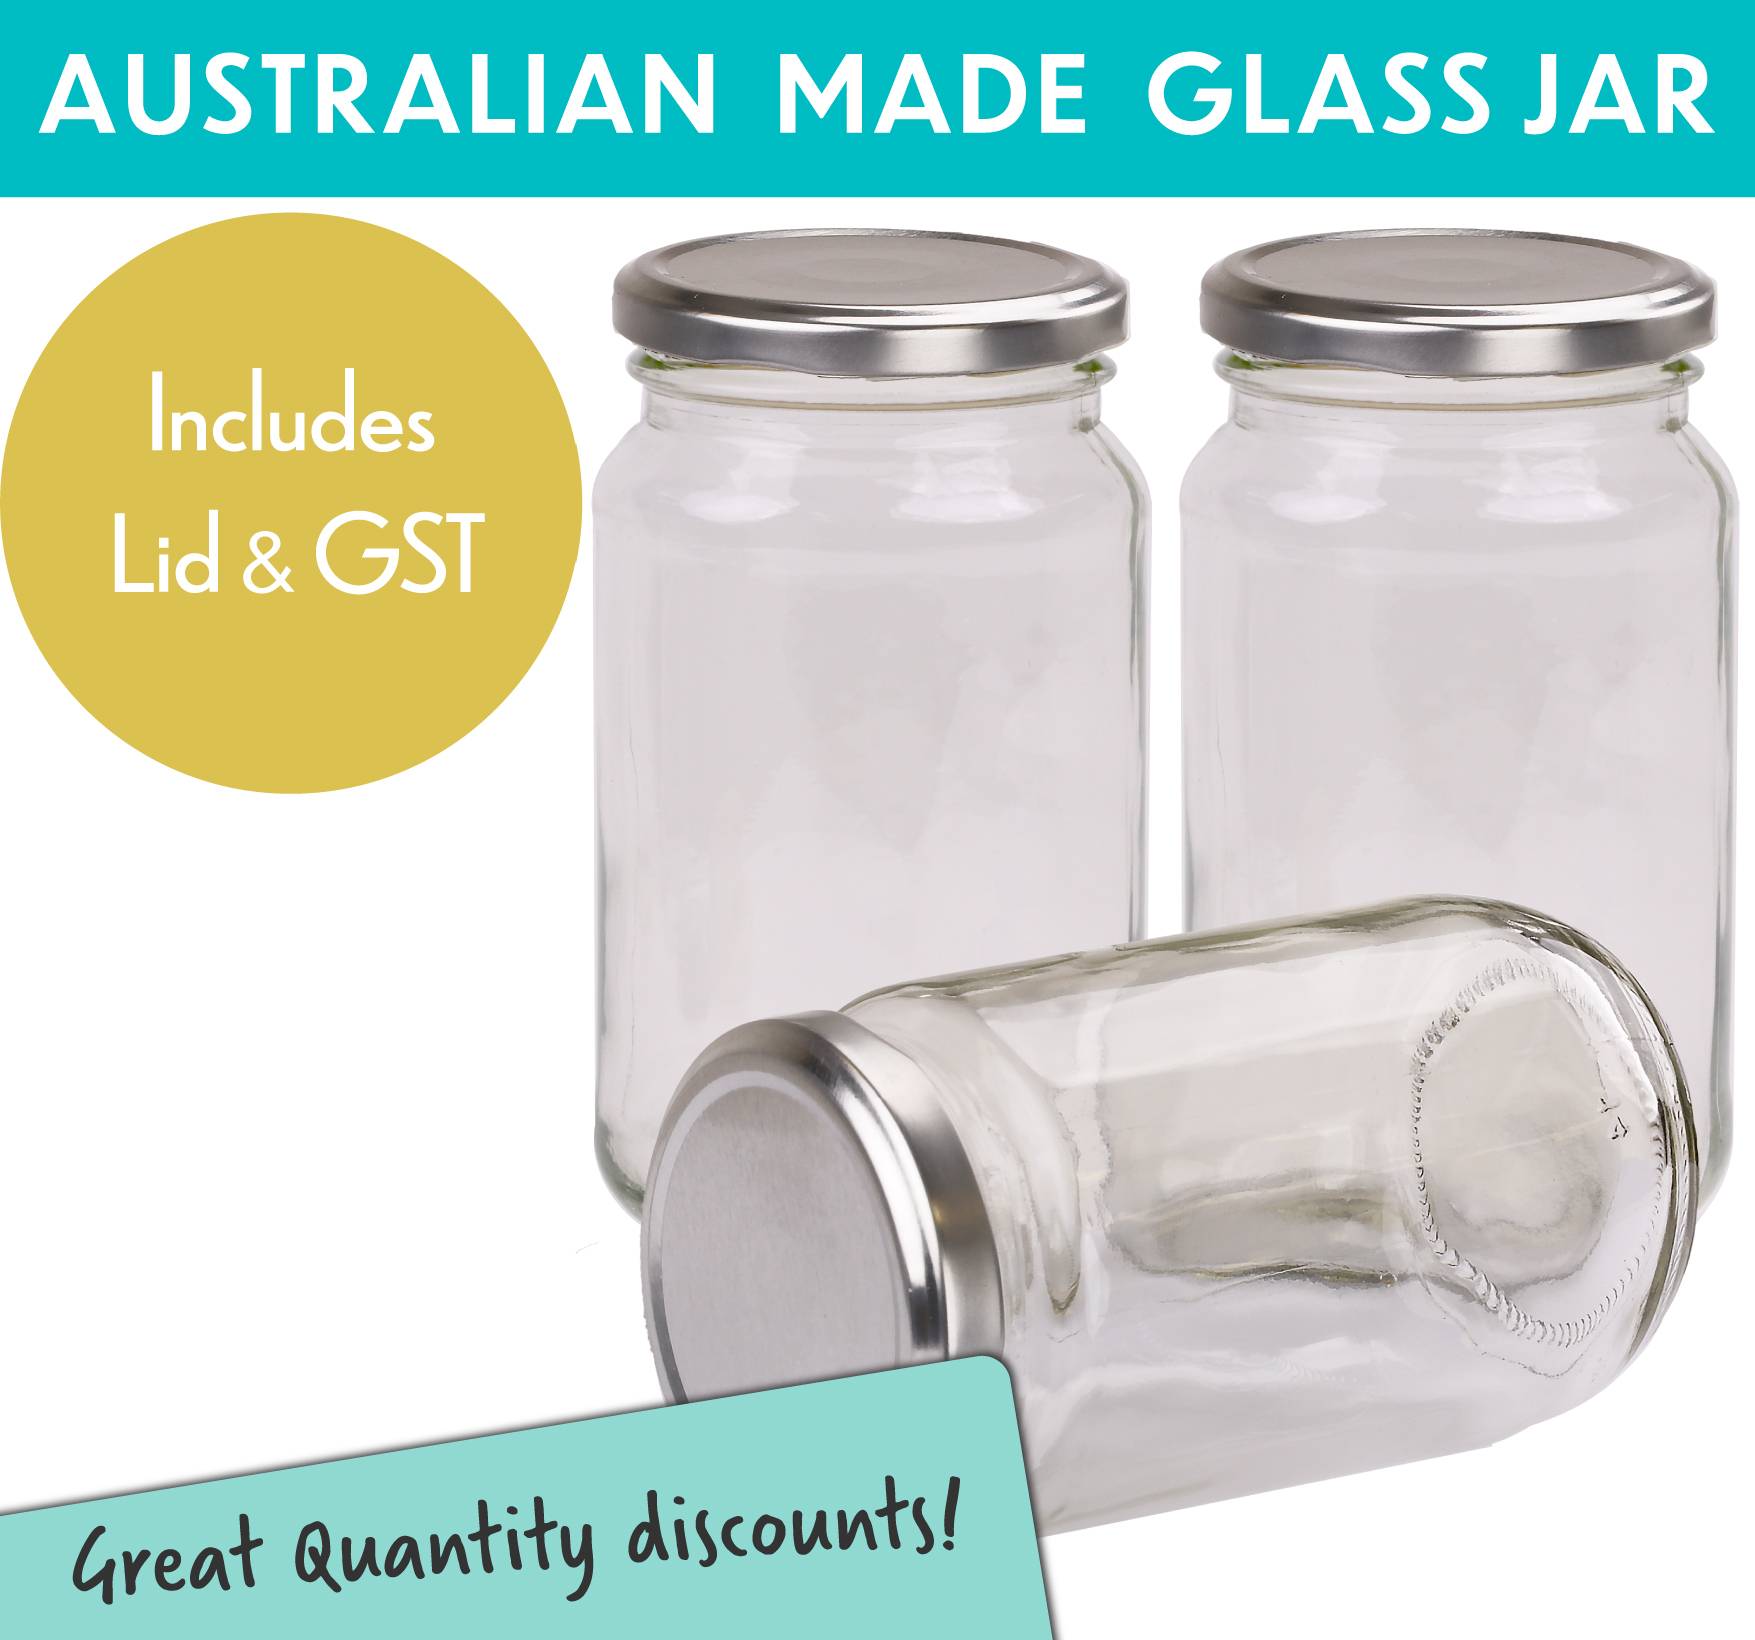 Round Glass Jars - 375ml / 500gm size - with Silver Lids. Australian Made